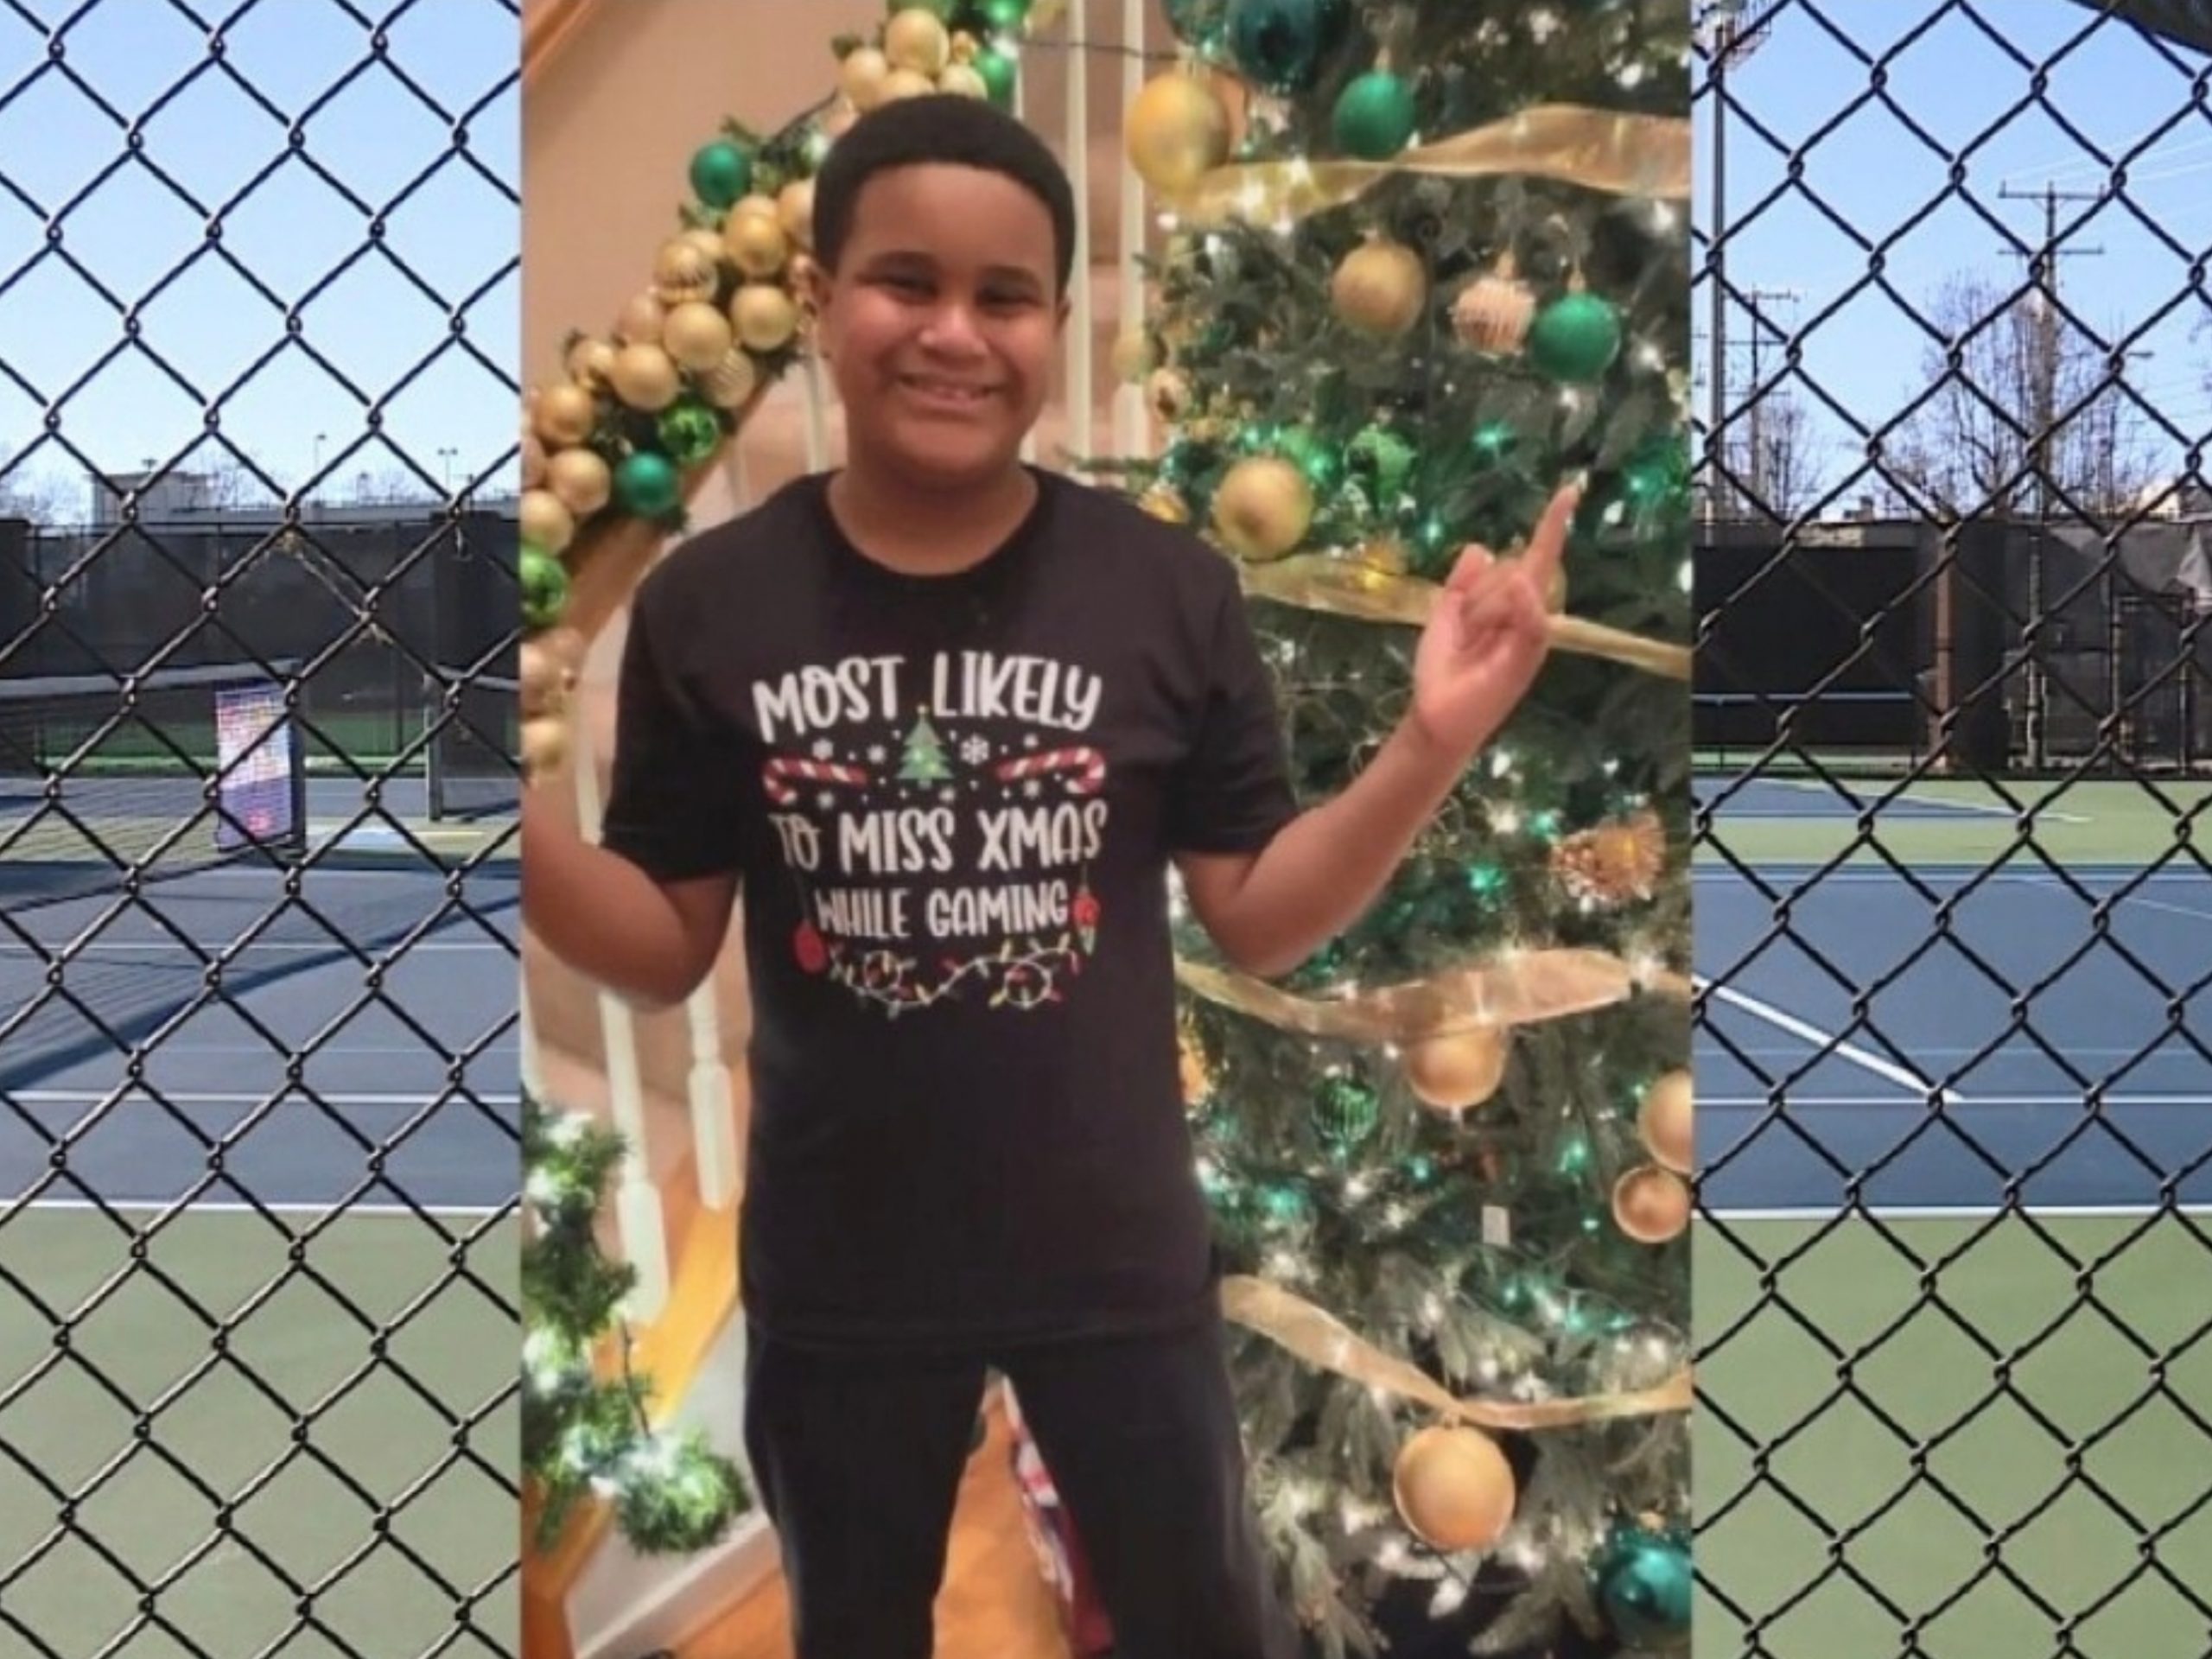 Autistic Boy Handcuffed By Cops at Police Tennis Program